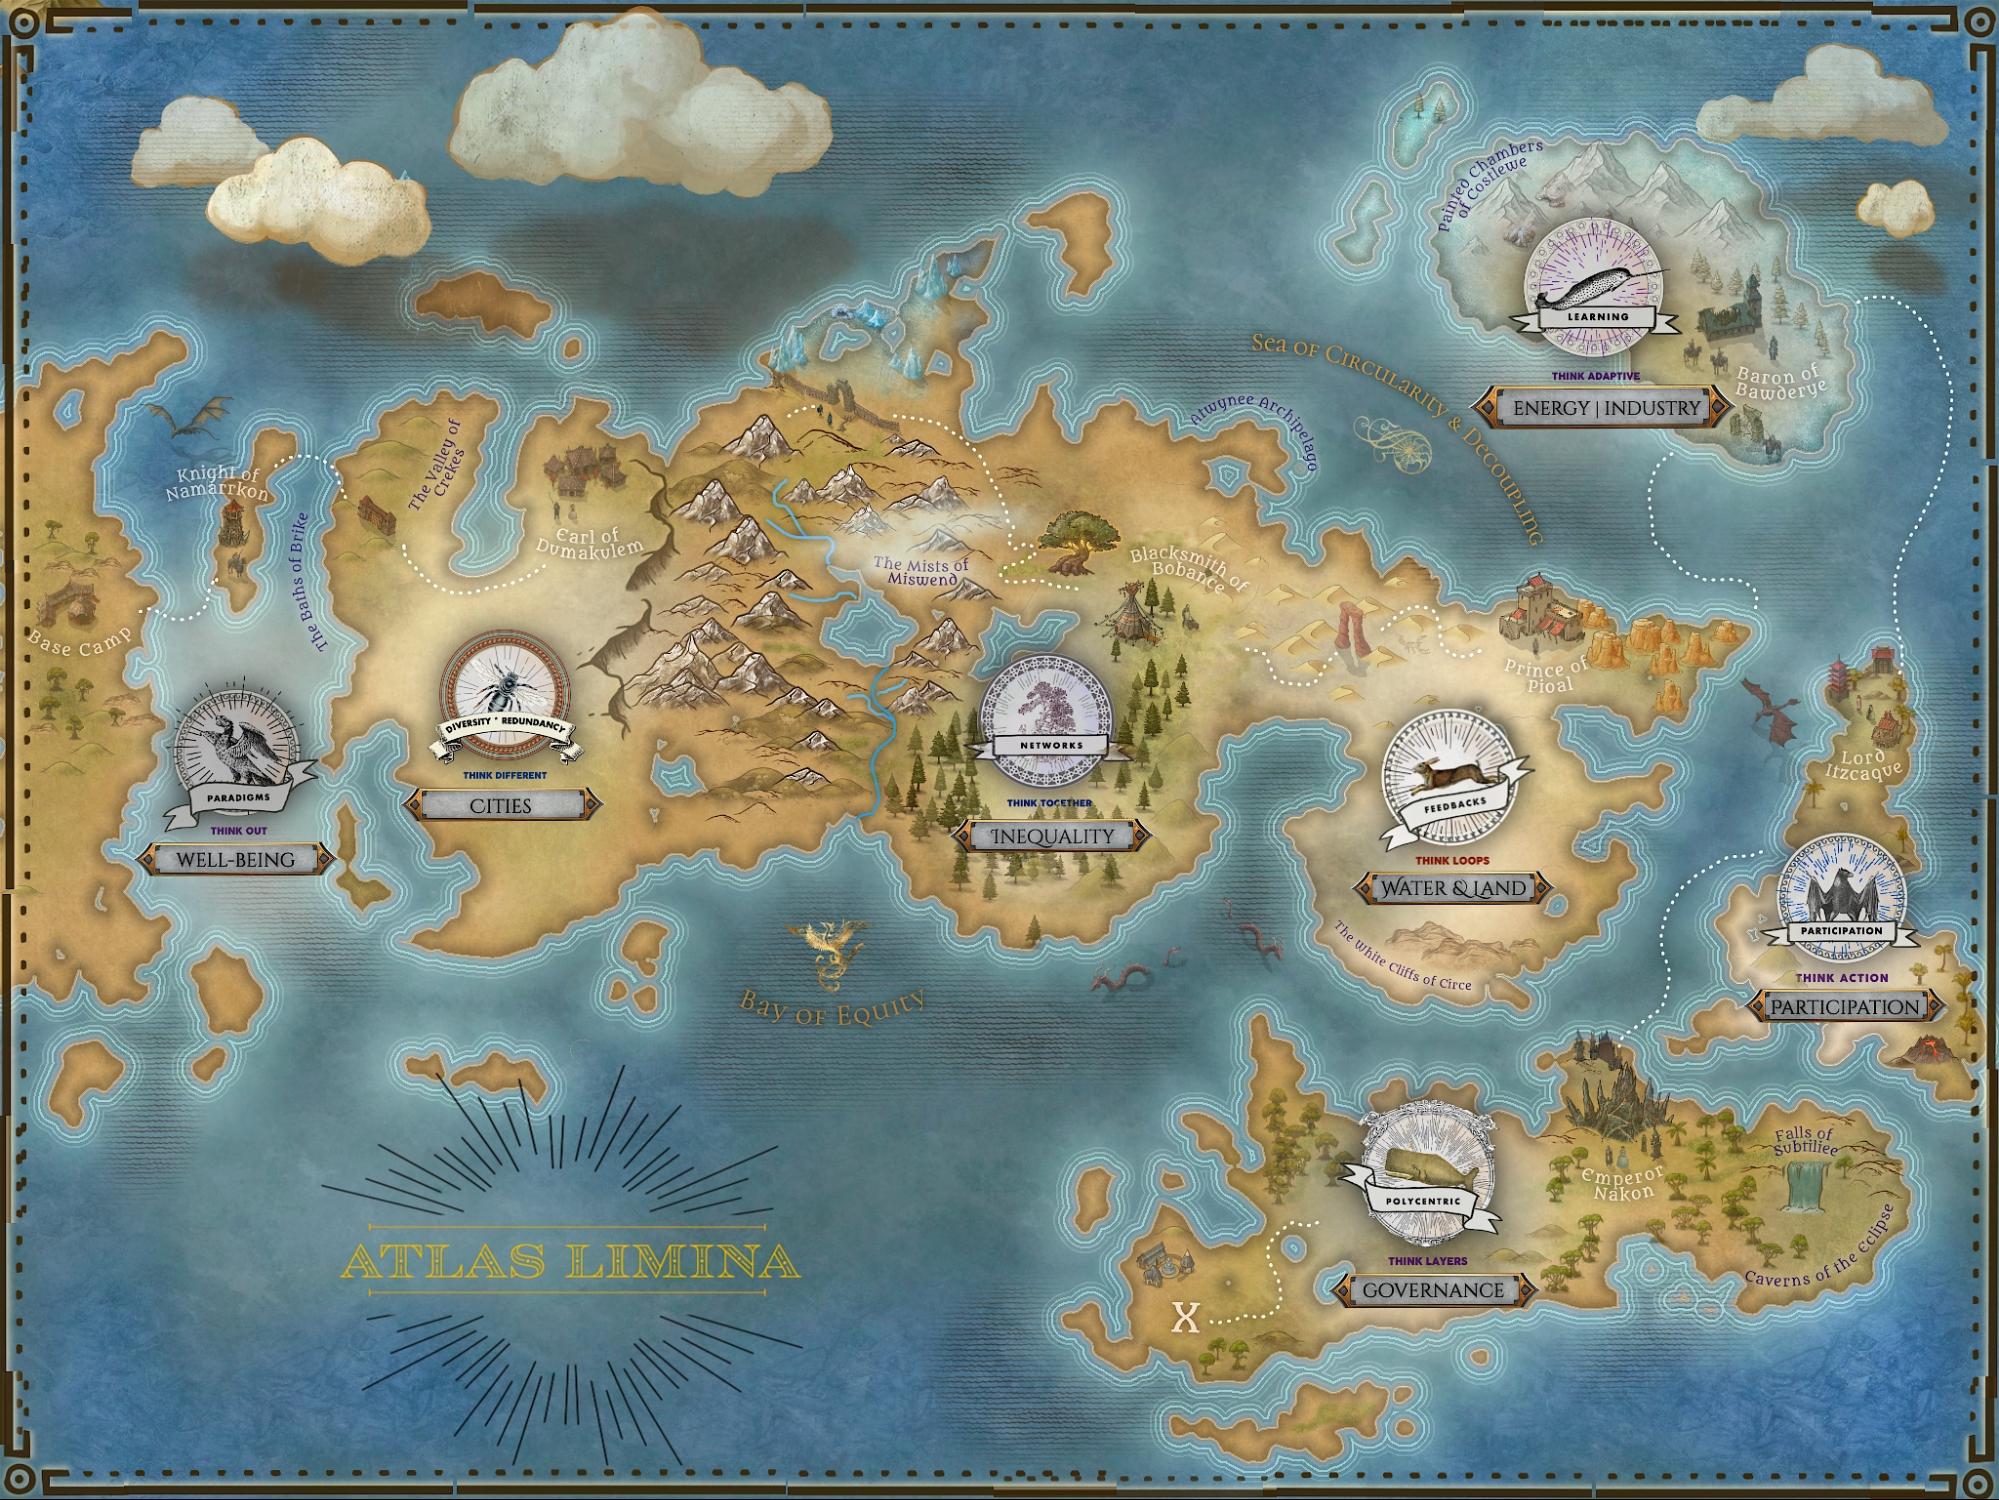 A map showing an imaginary world with islands, forests, inlets, and oceans.